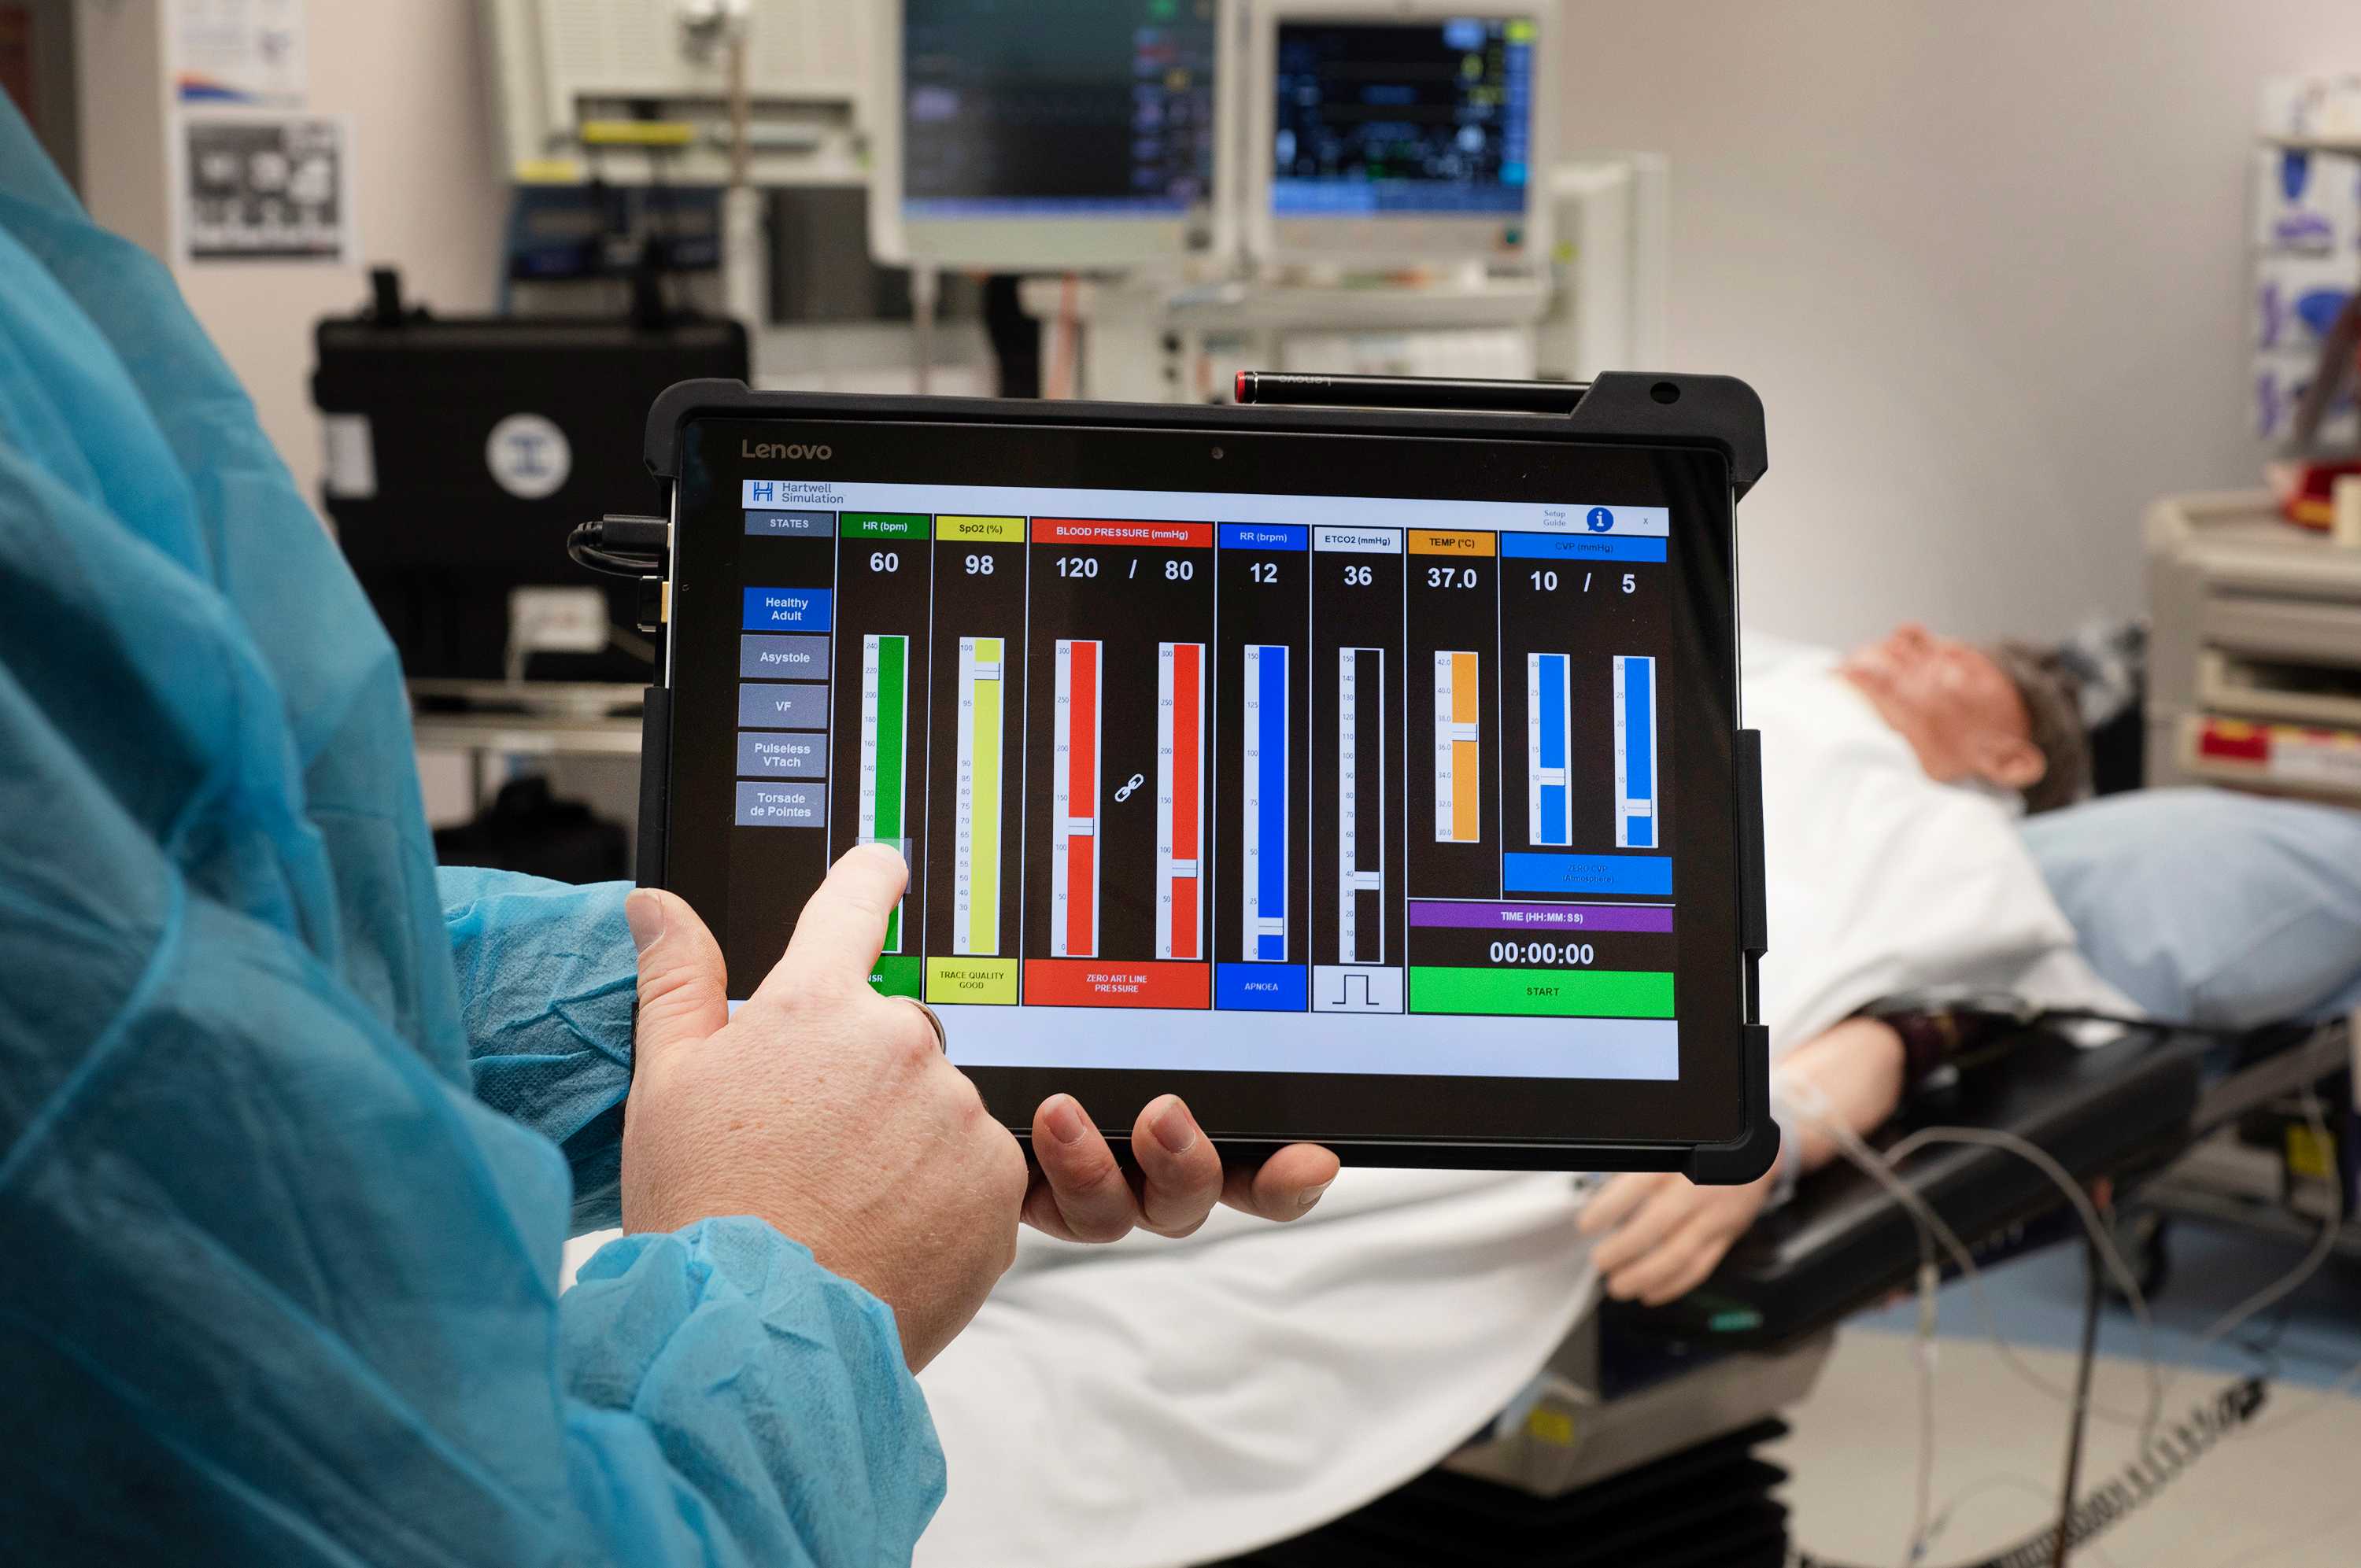 The Hartwell Simulation interface allows for easy control of real patient monitors to create realistic scenarios.